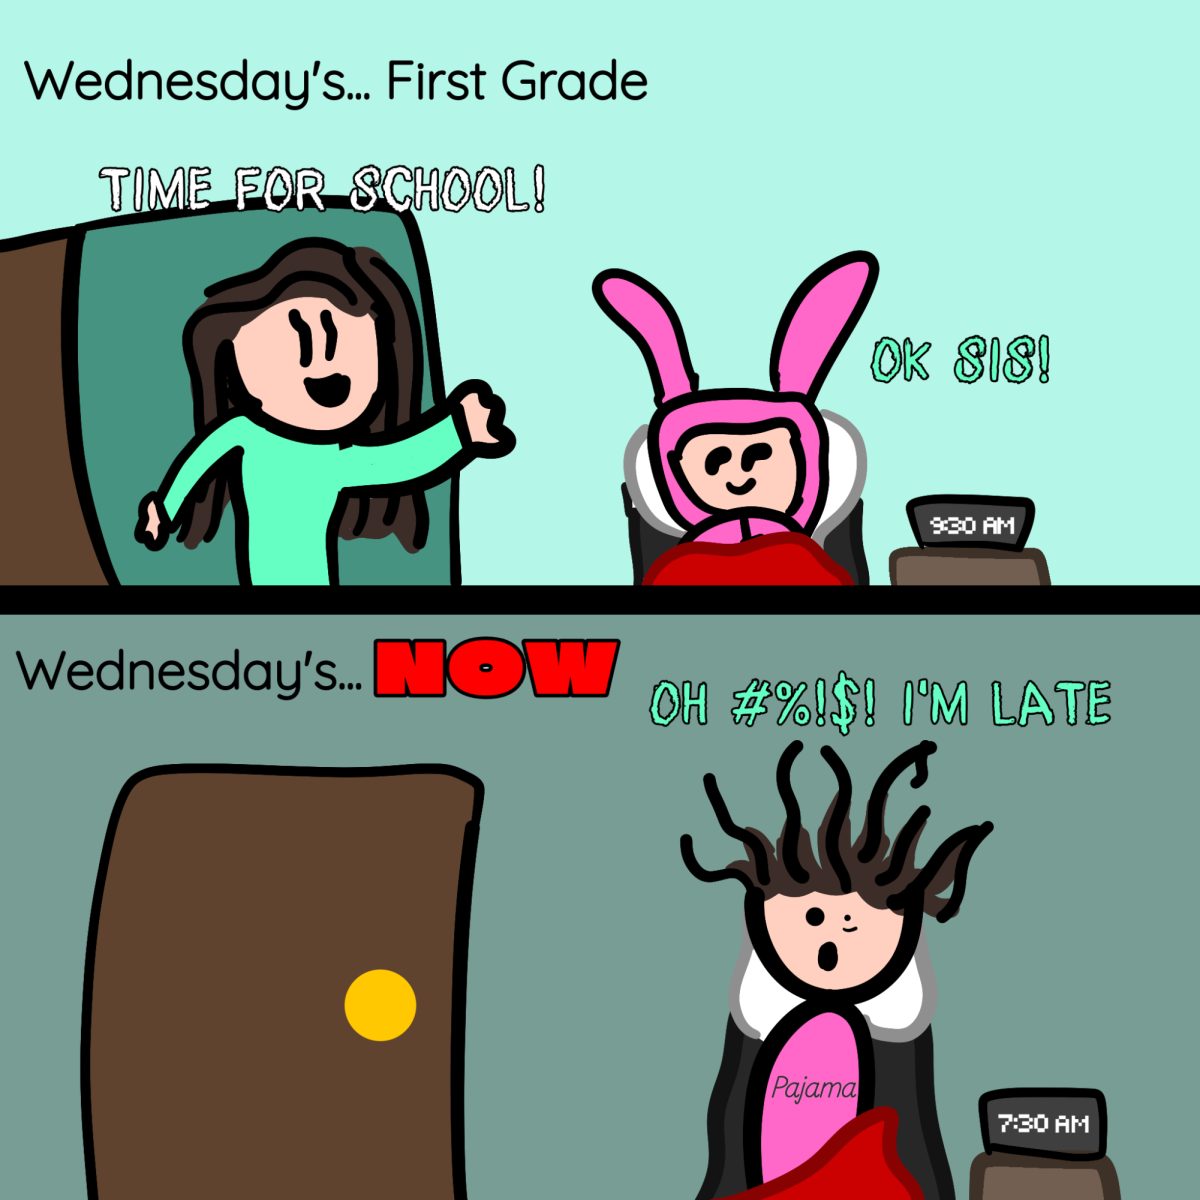 After today, there are only two more Wednesdays until the end of school!